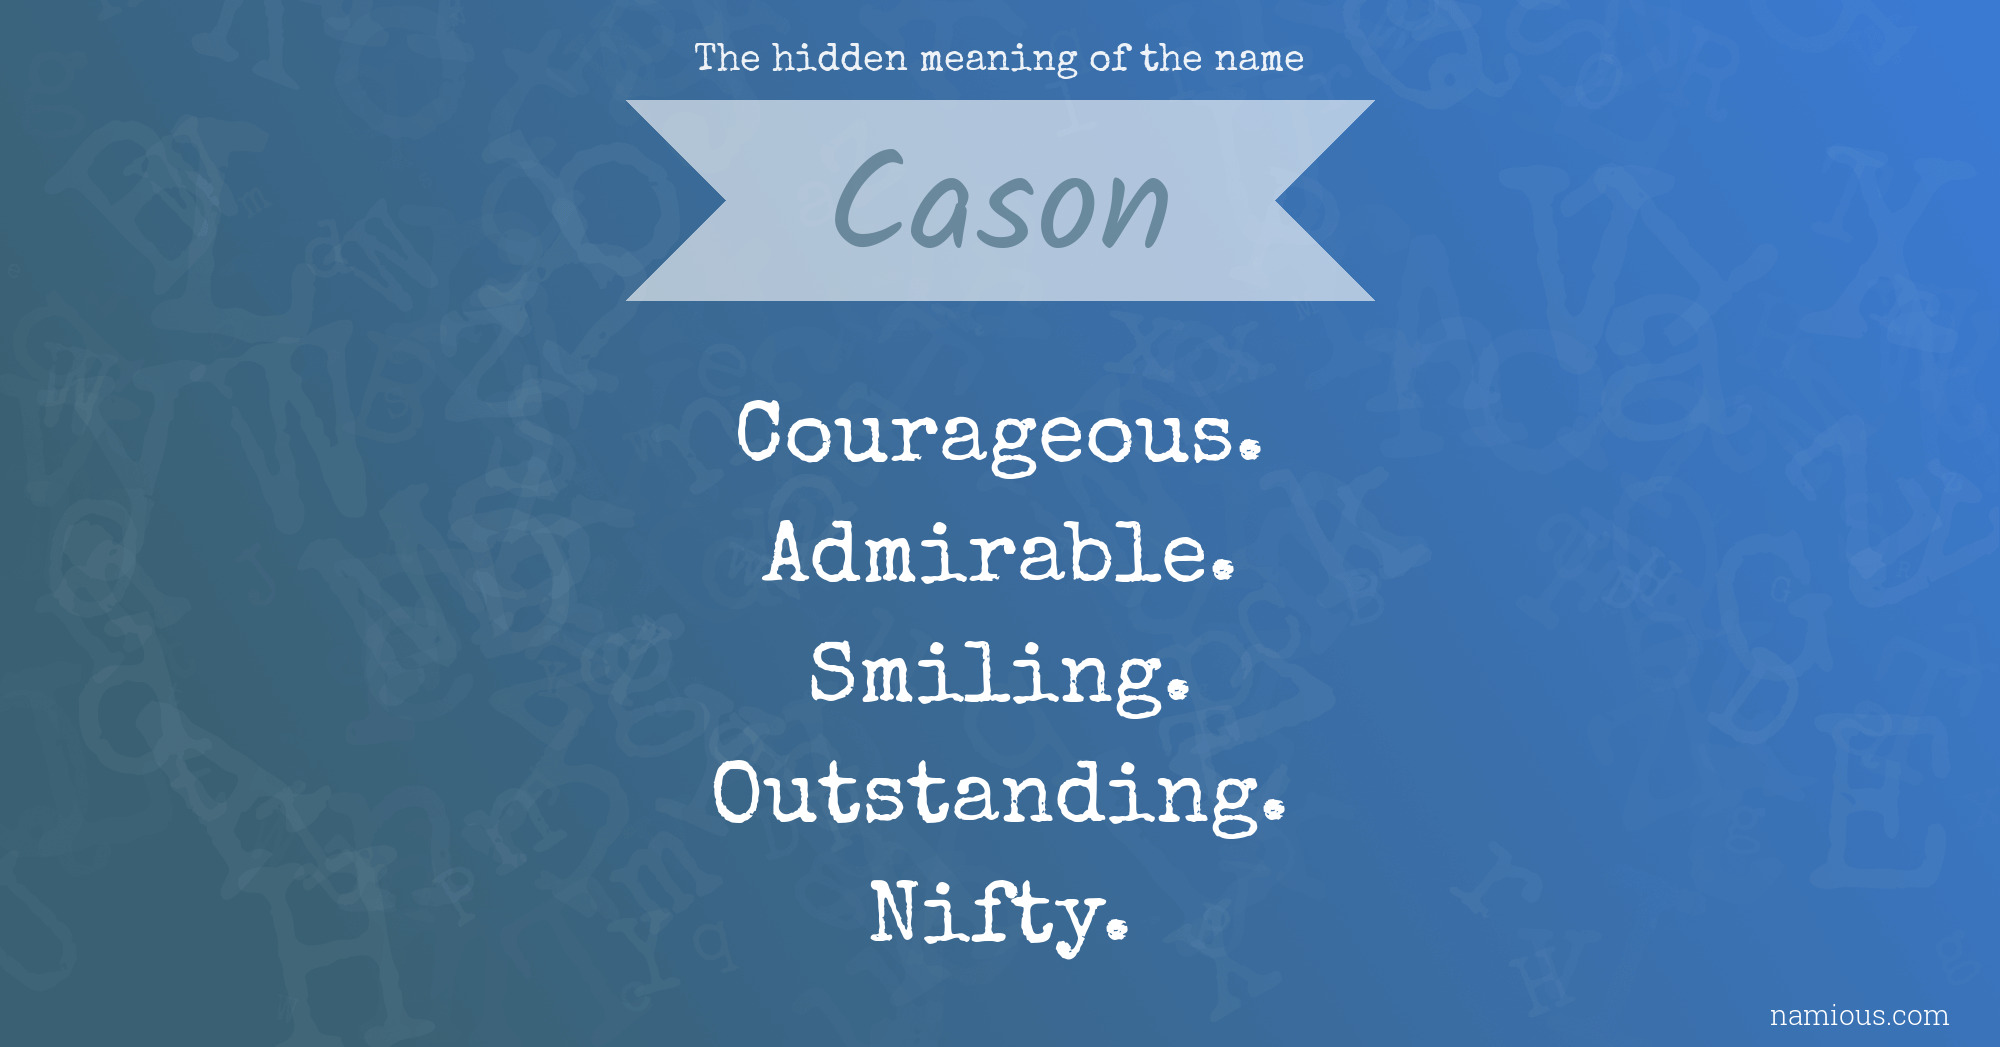 The hidden meaning of the name Cason